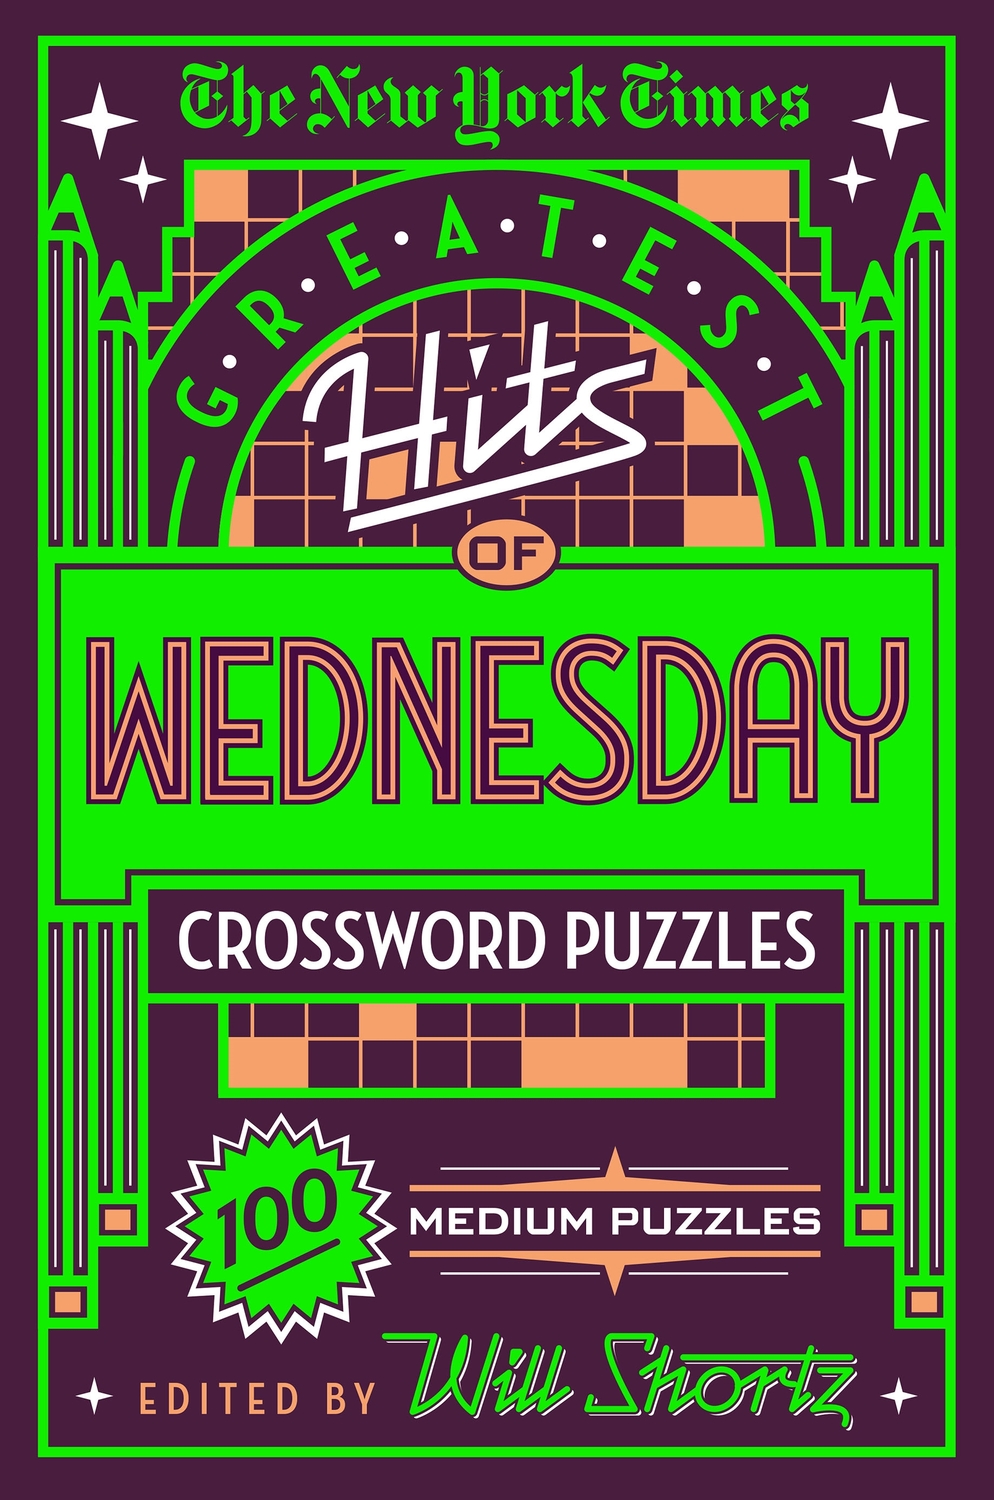 the-new-york-times-greatest-hits-of-wednesday-crossword-puzzles-100